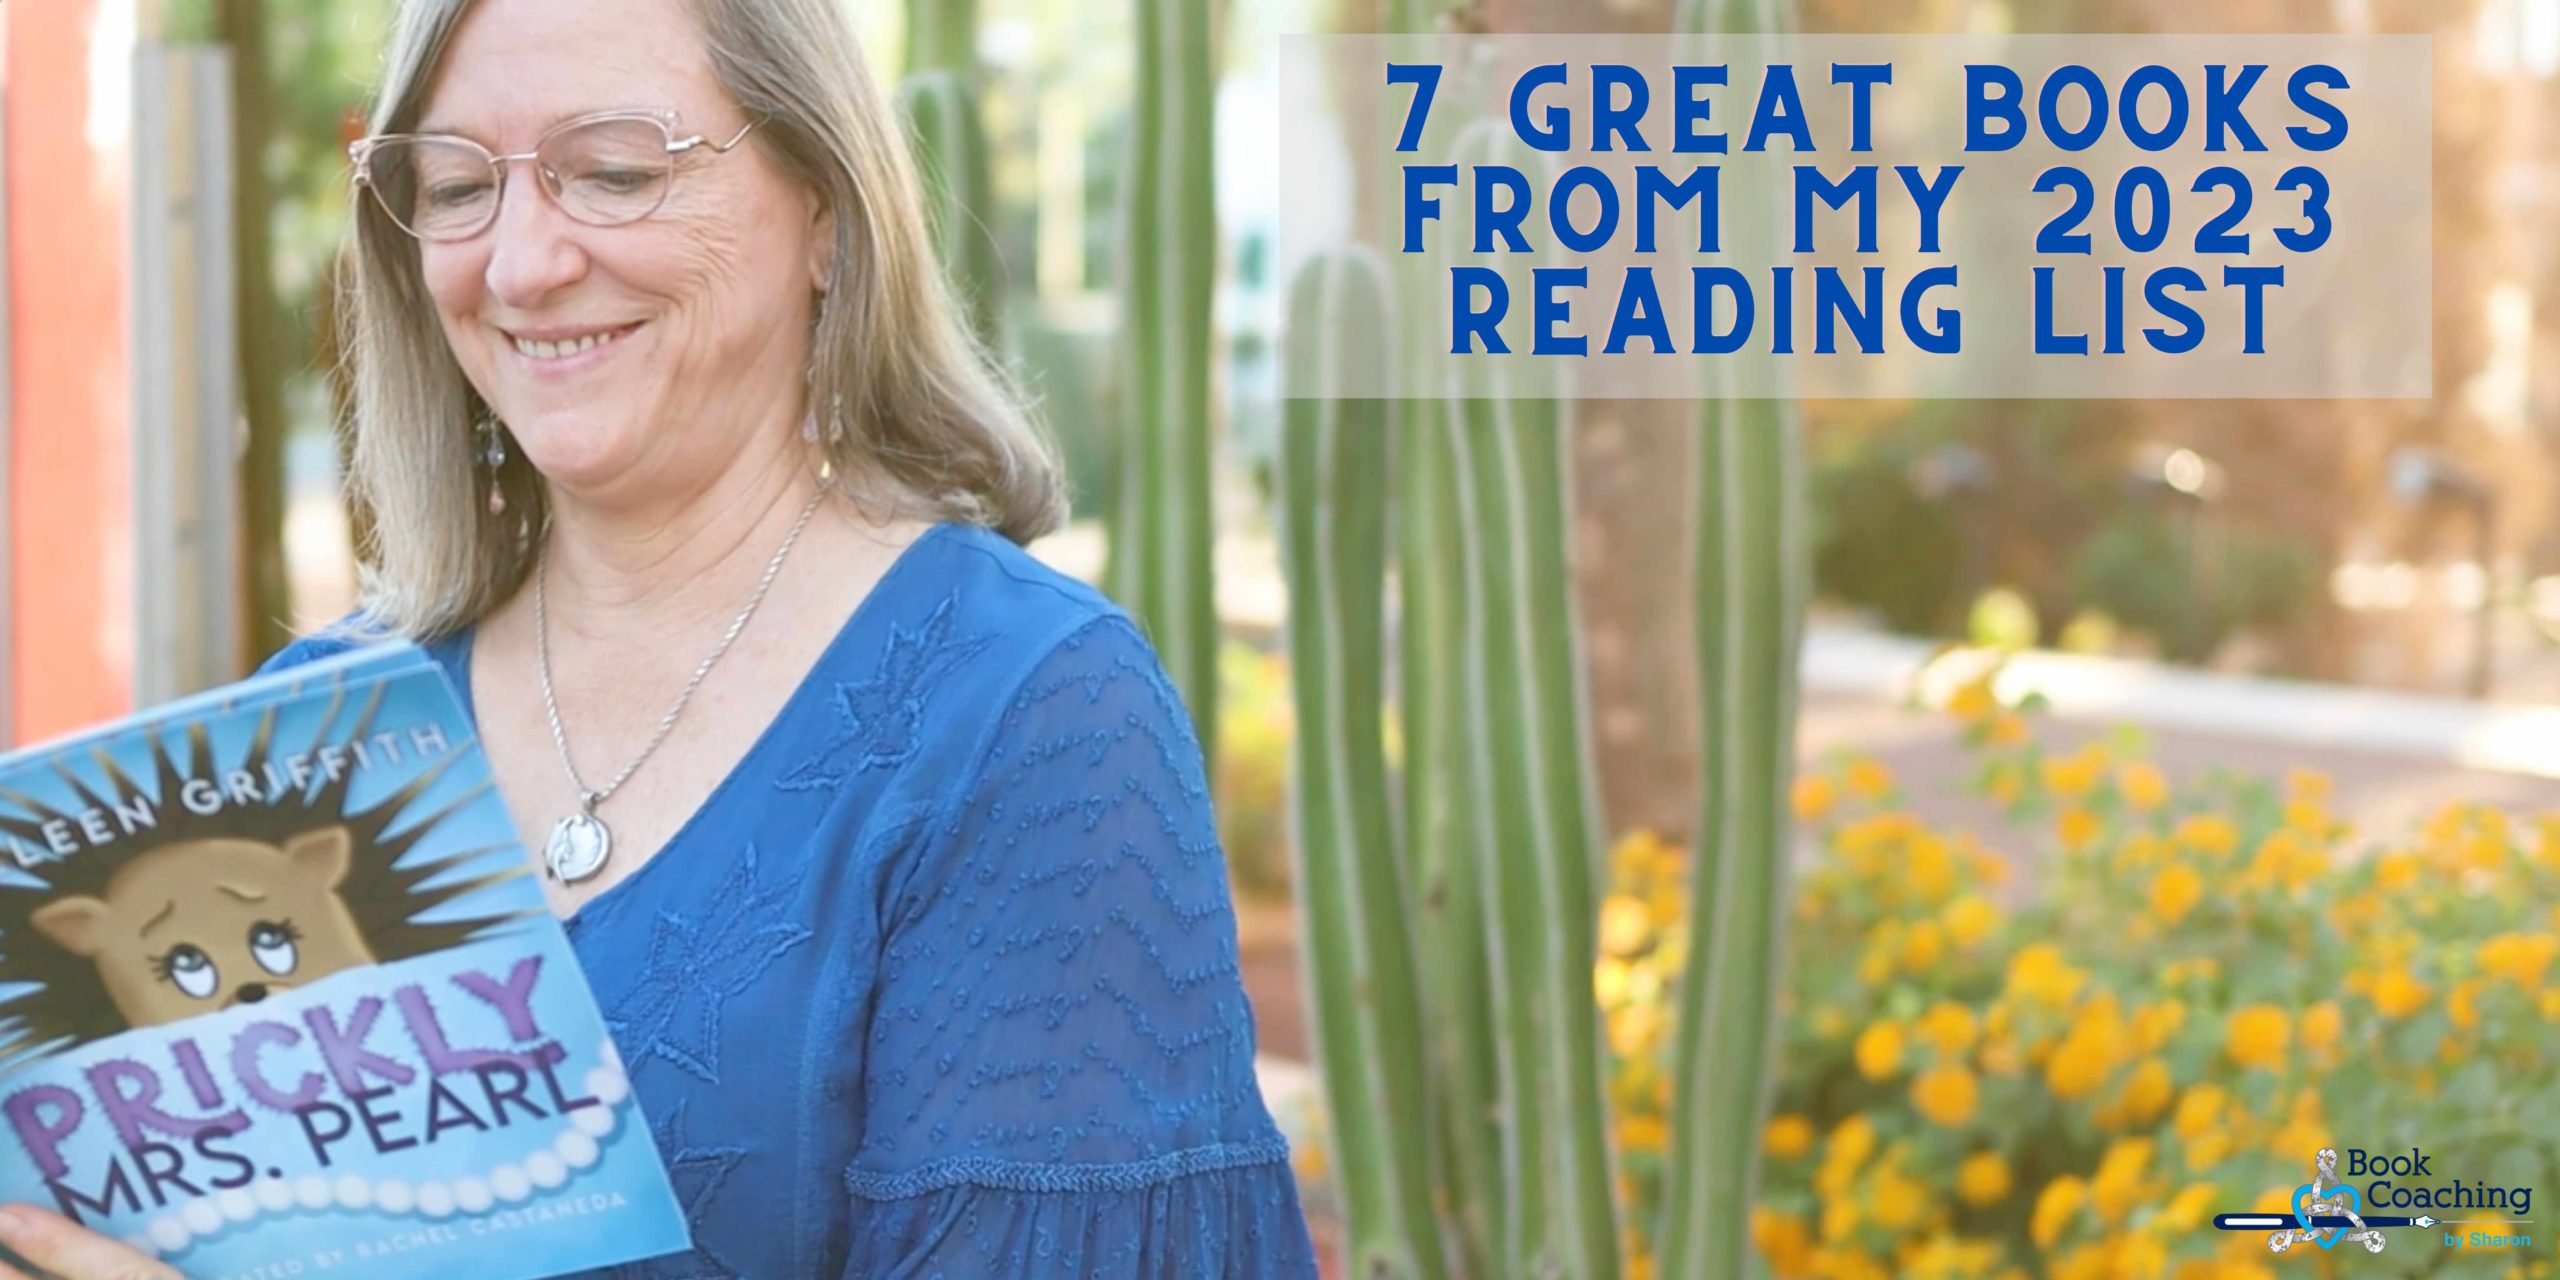 Sharon reading a book written by one of her clients (Prickly Mrs. Pearl by Colleen Griffin) with desert landsacping in the background. Text that reads: 7 Great Books from My 2023 Reading List